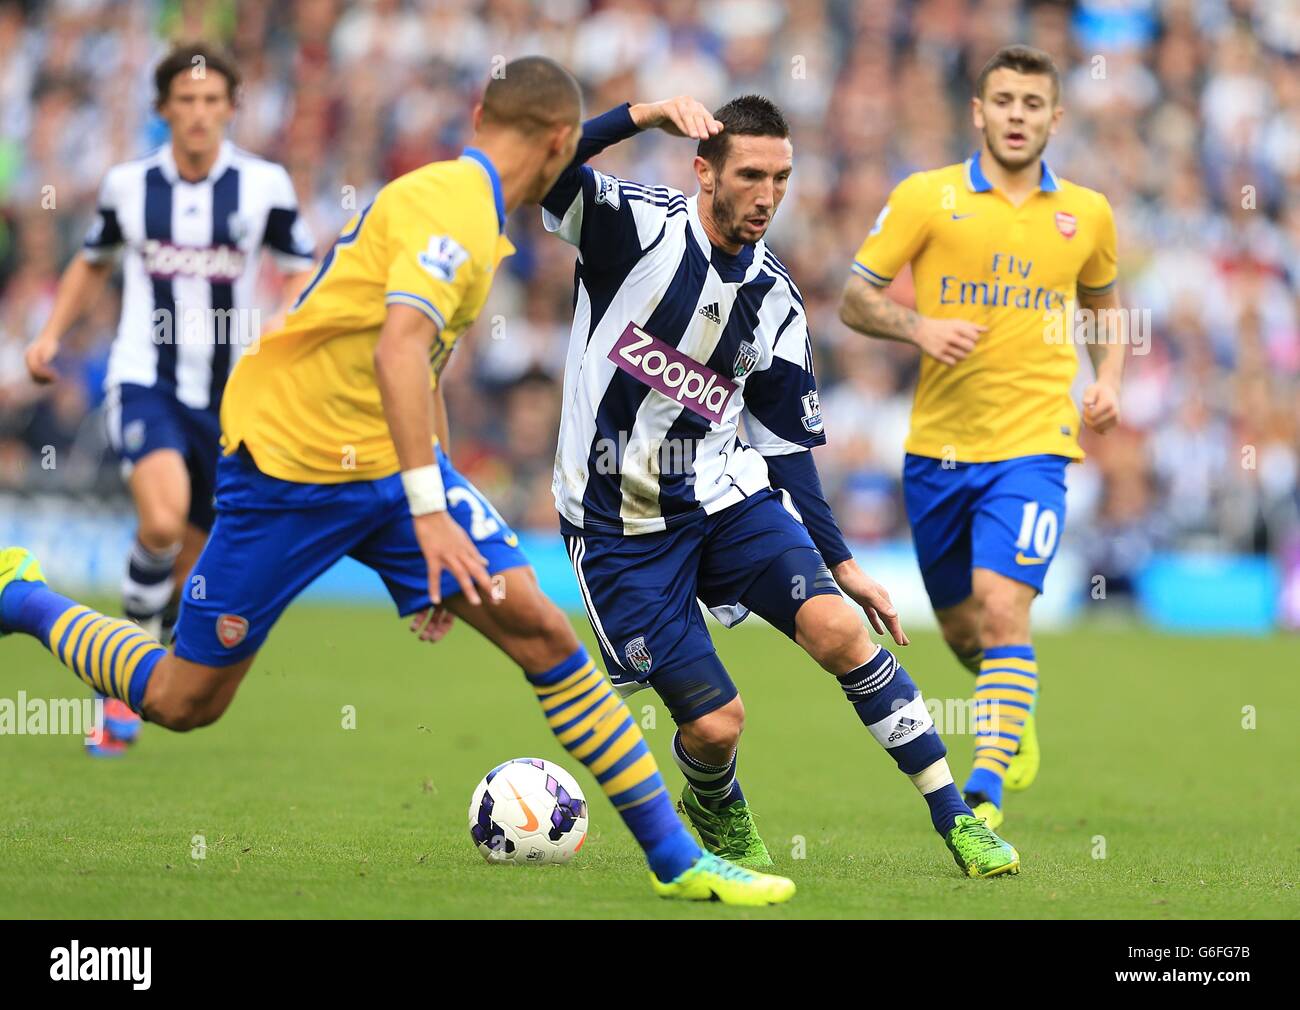 Soccer - Barclays Premier League - West Bromwich Albion v Arsenal - The Hawthorns. West Bromwich Albion's Morgan Amalfitano in action Stock Photo